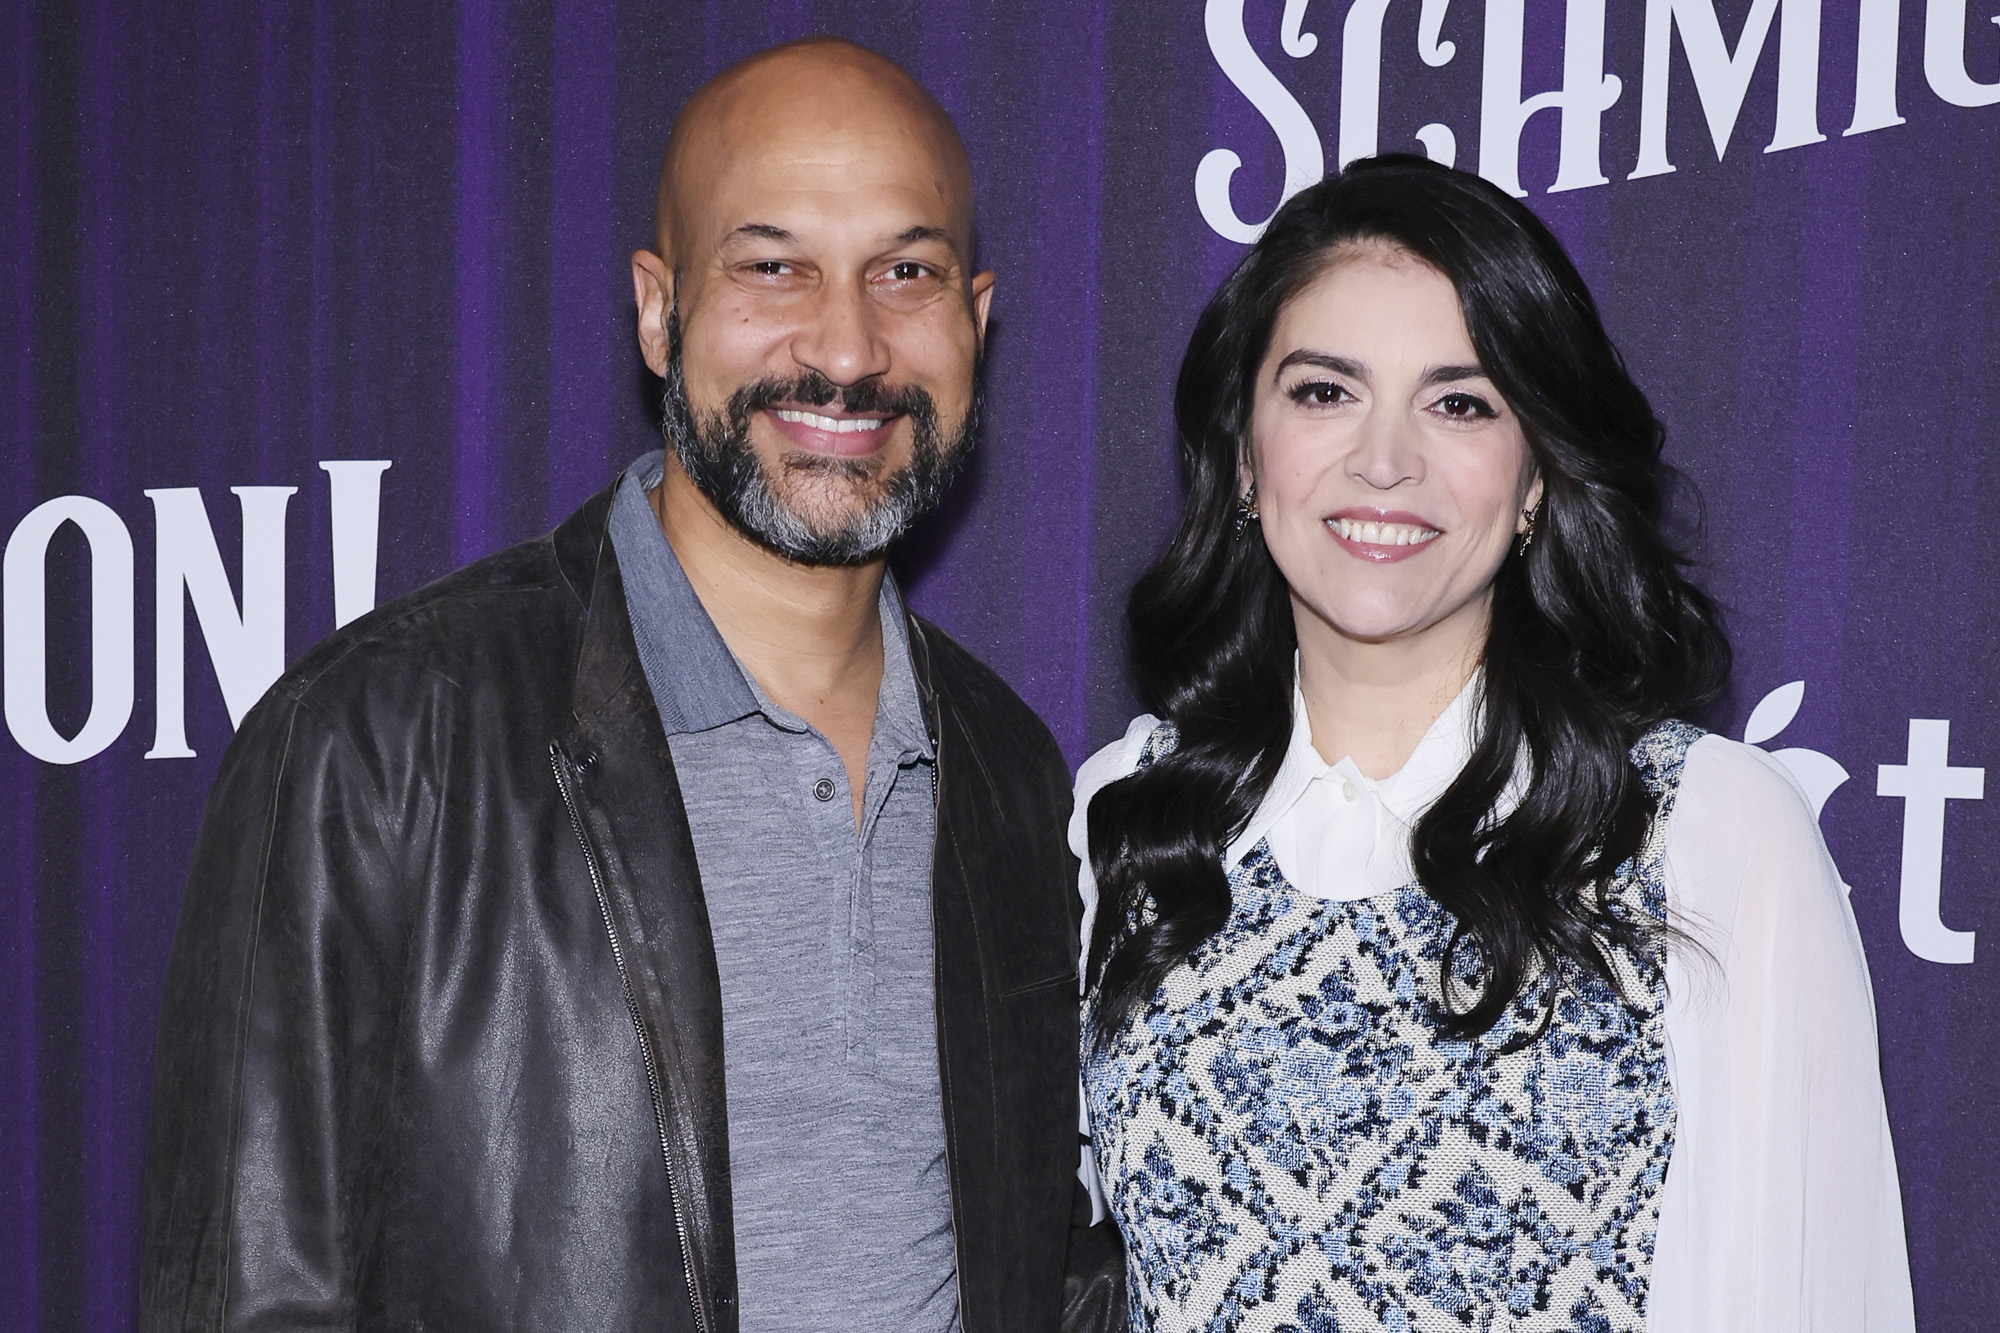 Keegan-Michael Key and Cecily Strong attend the photo call for Apple TV+'s "Schmigadoon!" Season 2 at Park Lane Hotel on March 21, 2023 in New York City.